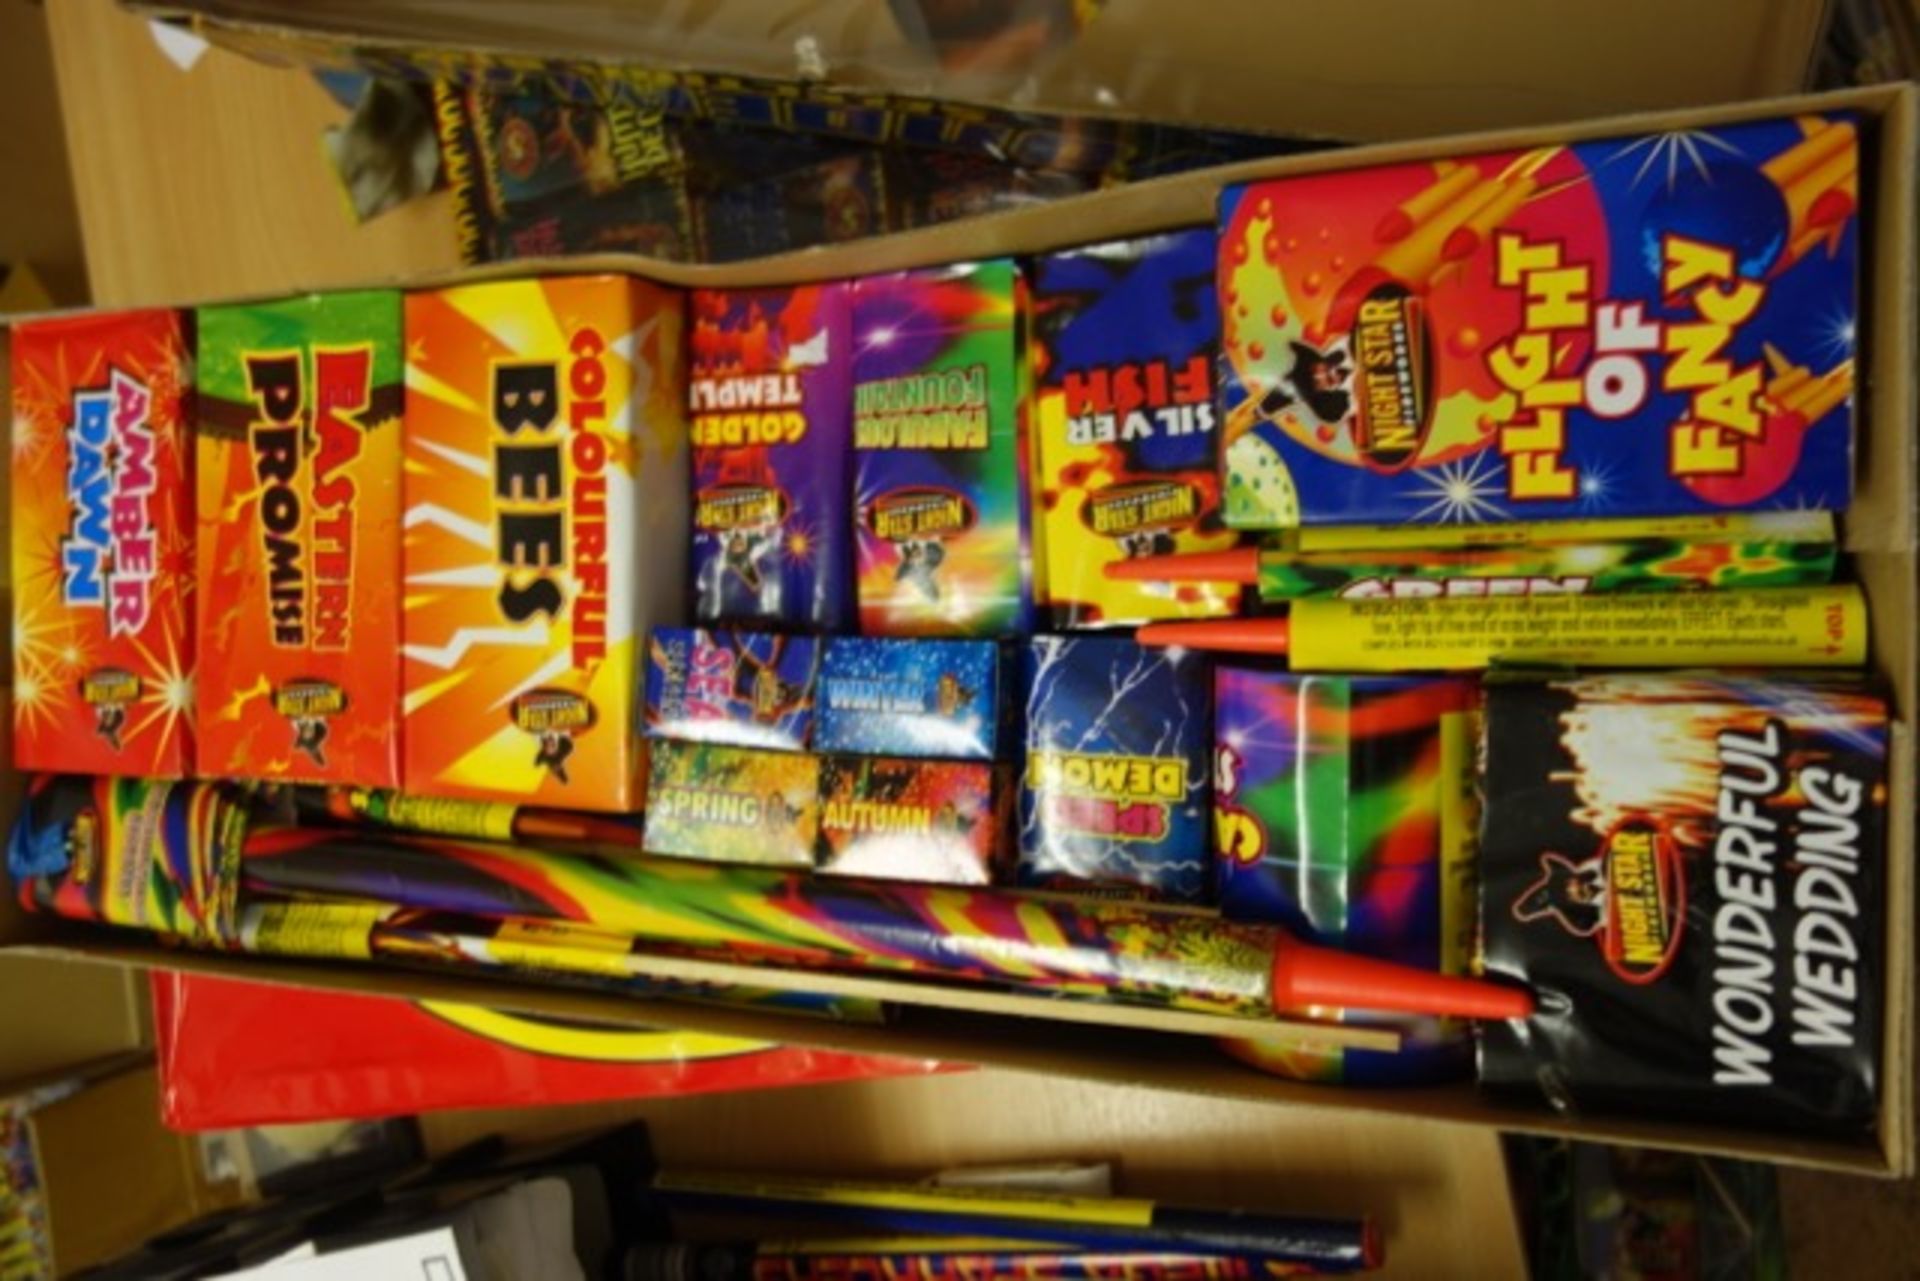 1 x Nightstar Fireworks - 35 Piece Wonderland Selection Box. A 35 piece selection with a great - Image 4 of 4